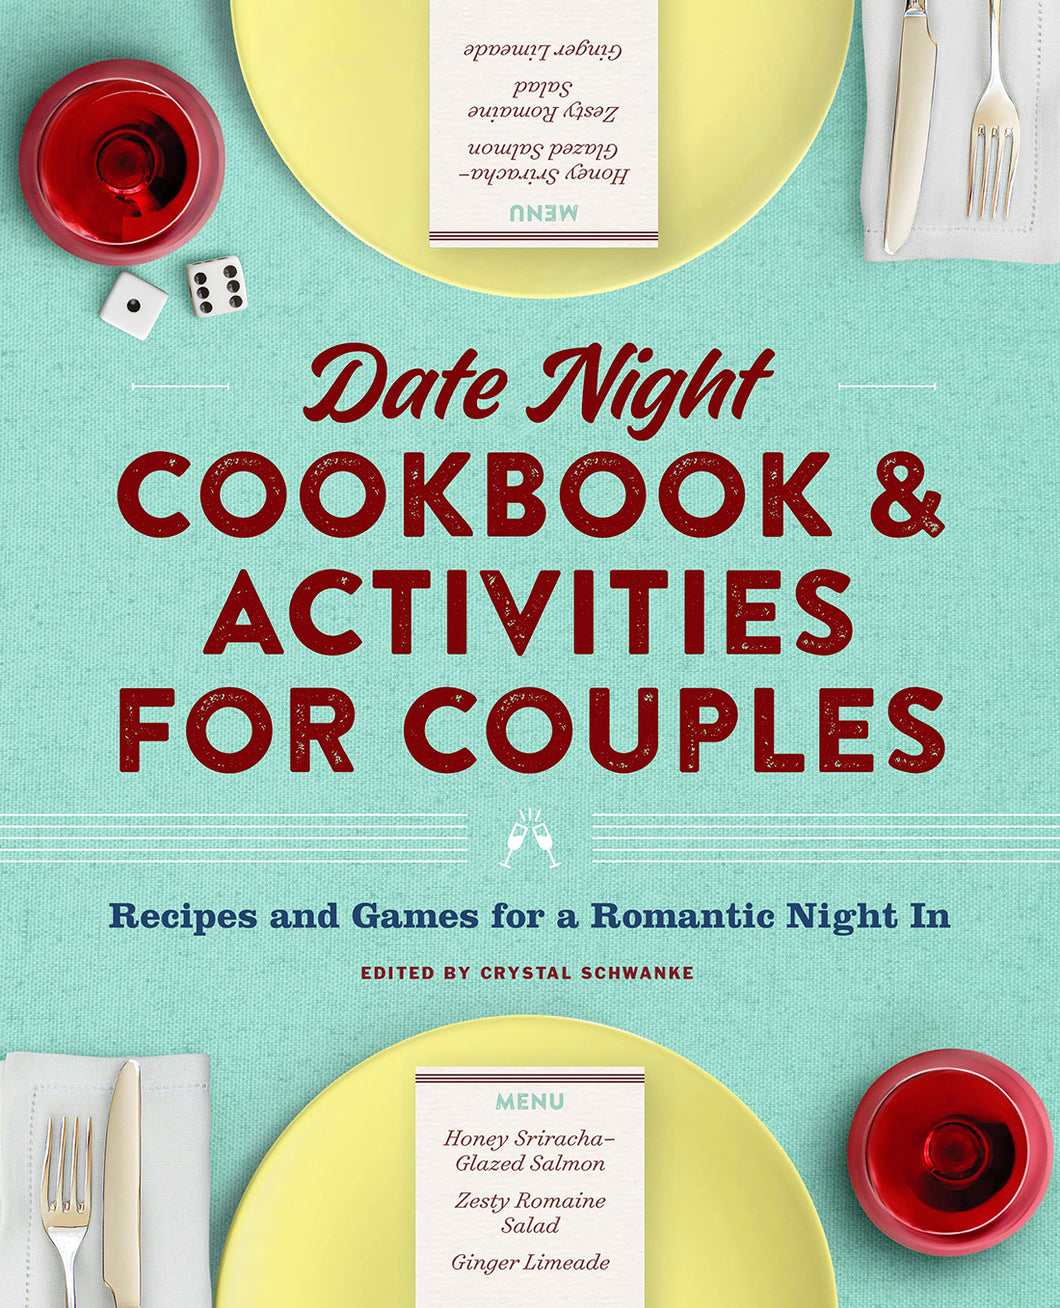 Date Night Cookbook and Activities for Couples: Recipes and Games for a Romantic Night in by Crystal Schwanke / BOOK OR BUNDLE